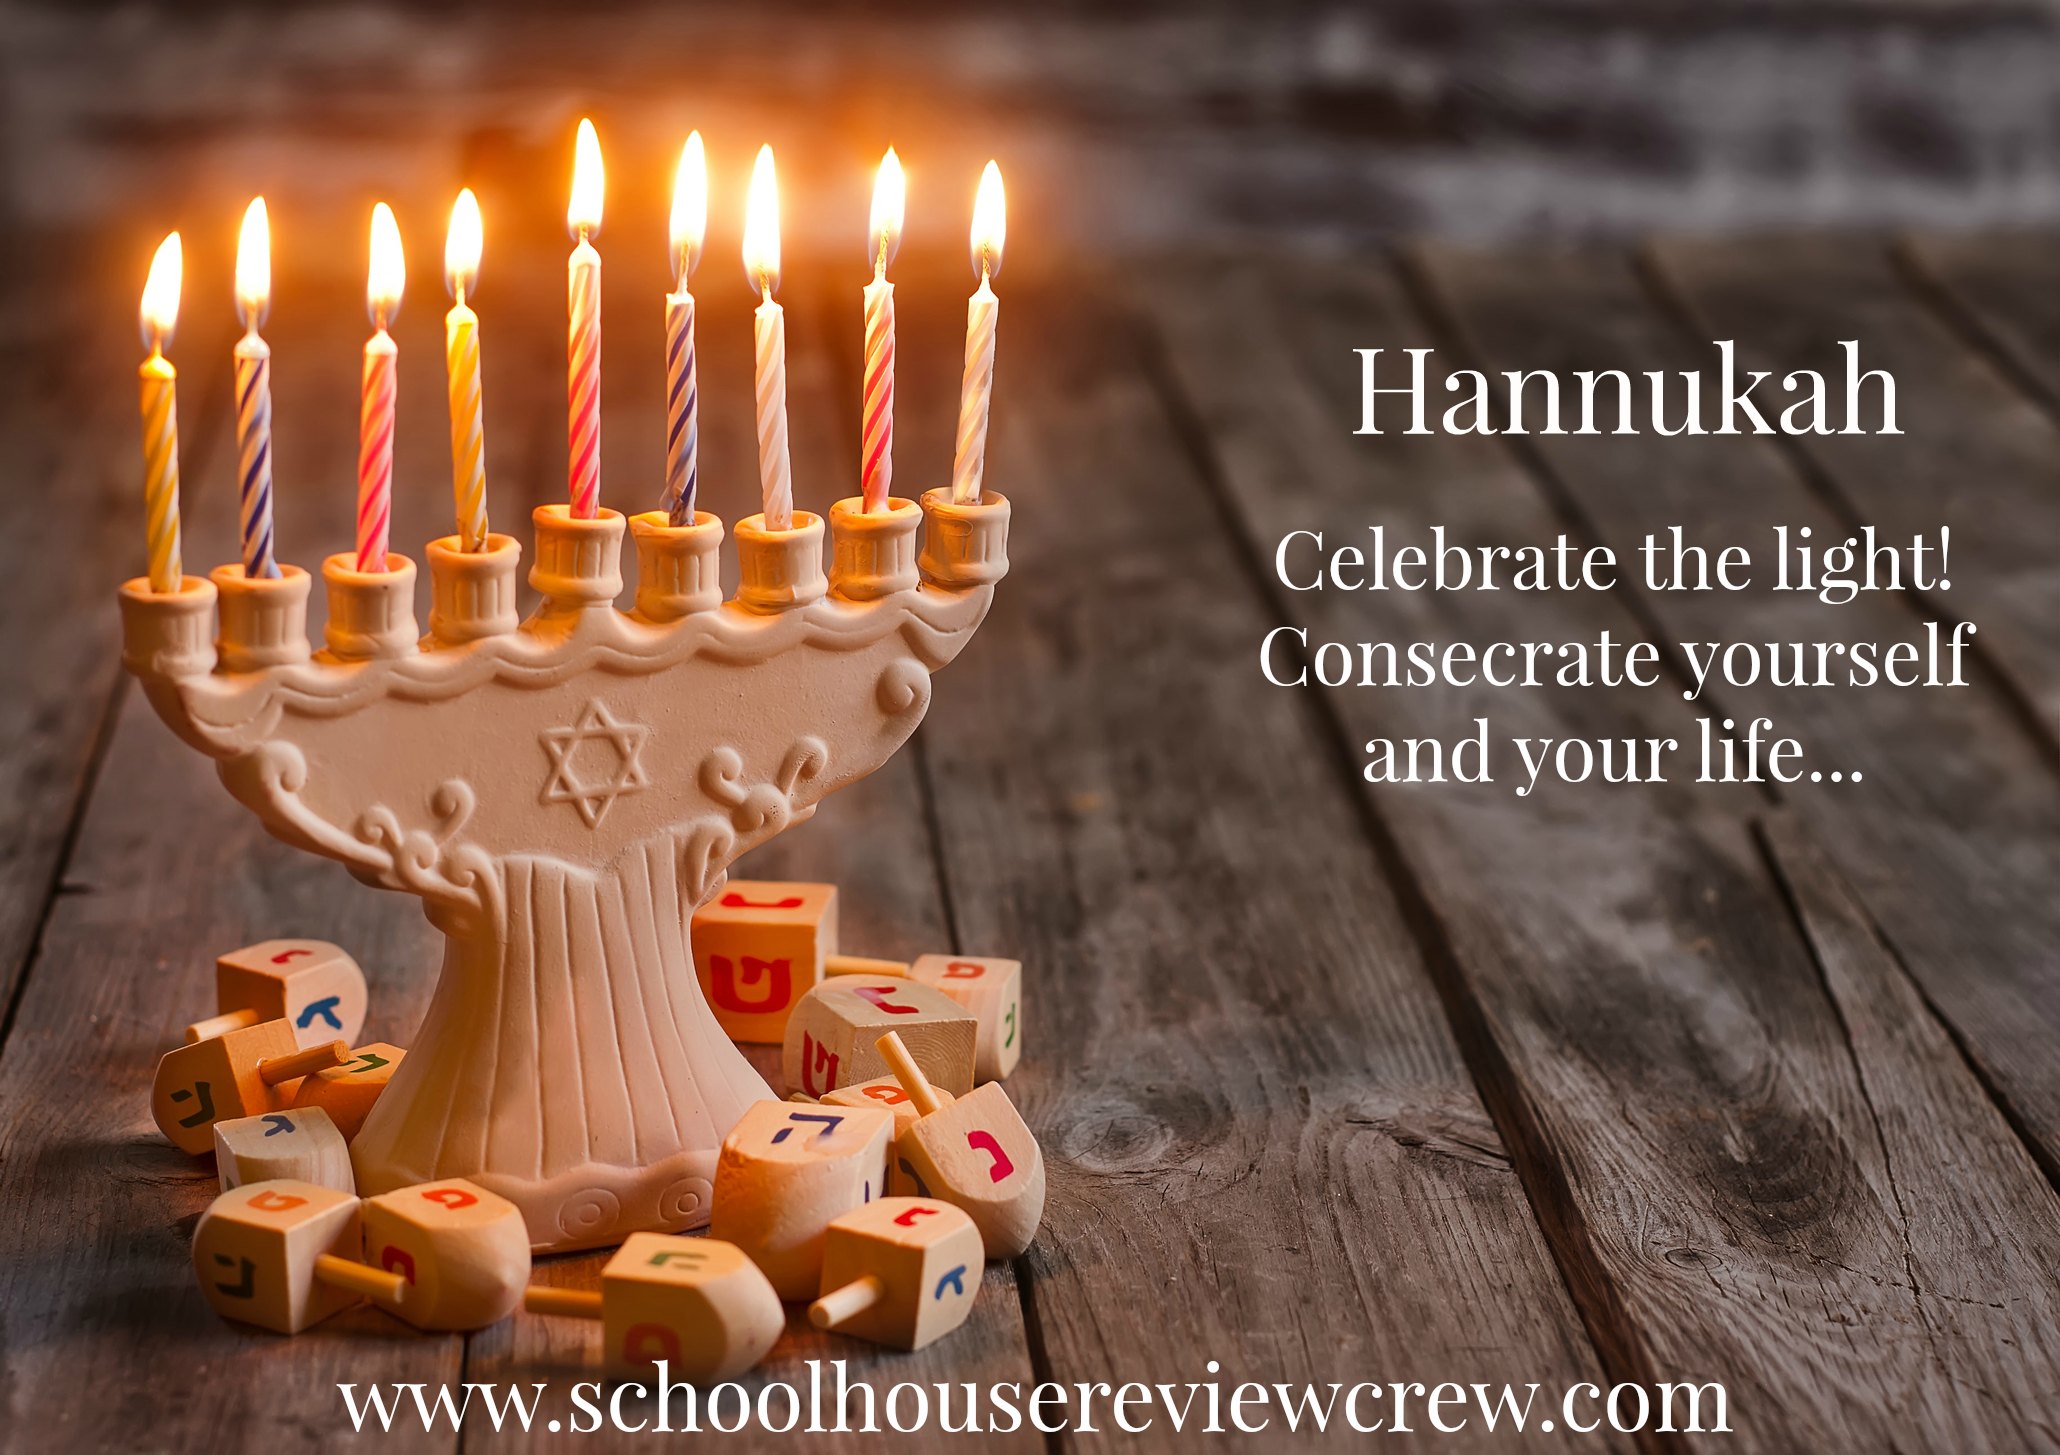 Hannukah Celebrate the light consecrate yourself and your life